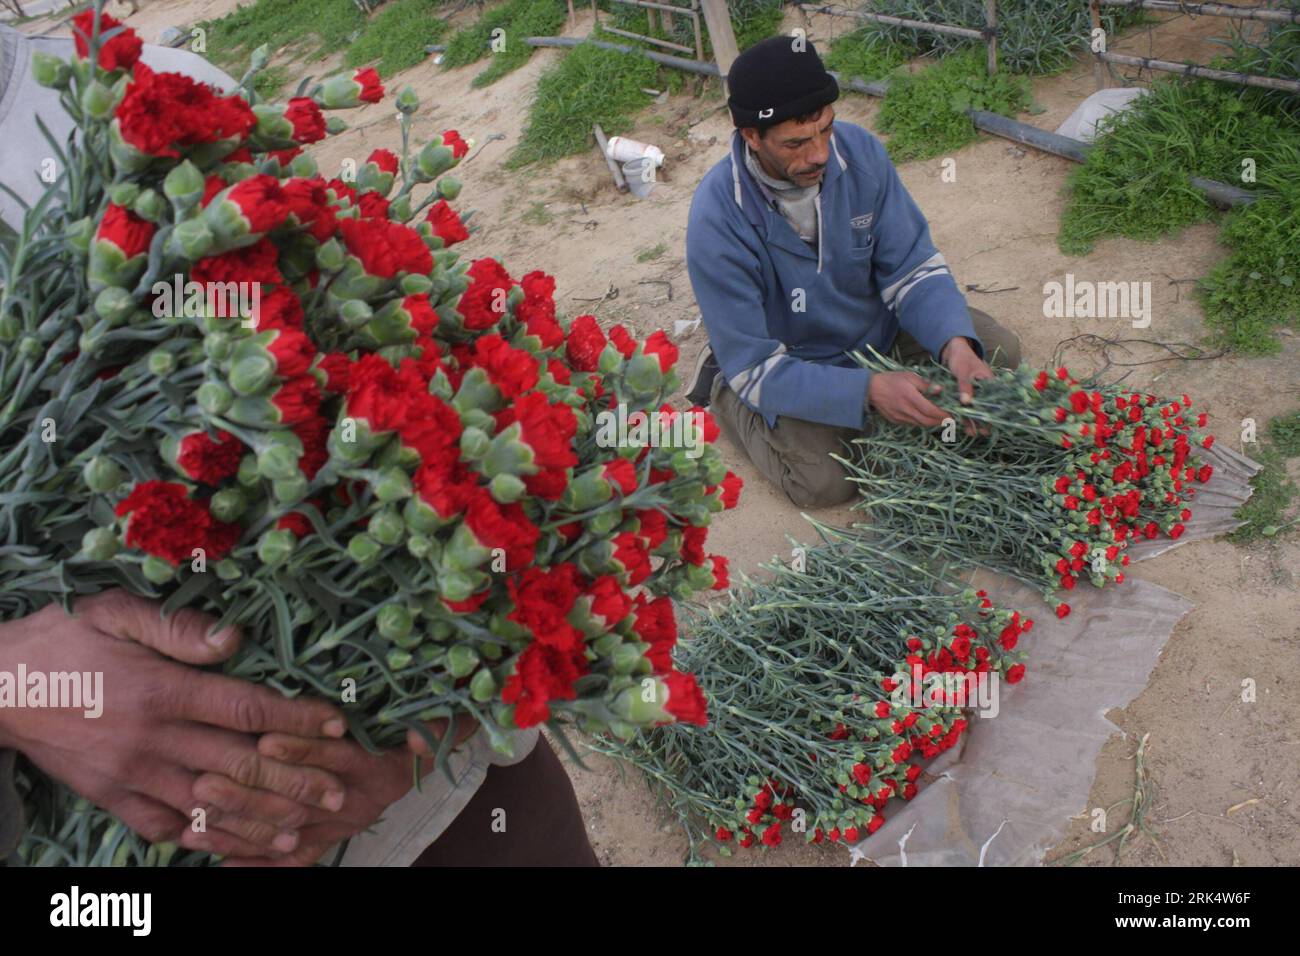 Bildnummer: 53672960  Datum: 16.12.2009  Copyright: imago/Xinhua (091216) -- GAZA, Dec. 16, 2009 (Xinhua) -- A Palestinian farmer gathers flowers at a farm after Israel granted approval for the export of Palestinian flowers from the Gaza Strip to the European market in Rafah, southern Gaza Strip, Dec. 16, 2009. Farmers in the strip enter their third year of export restrictions which were imposed by Israel after the Hamas took control of the strip. (Xinhua/Khaled Omar) (zhs) (2)GAZA-FLOWERS-ISRAEL PUBLICATIONxNOTxINxCHN Blumen Zucht Blumenzucht Nelkenzucht Nelken Export kbdig xub 2009 quer o0 W Stock Photo